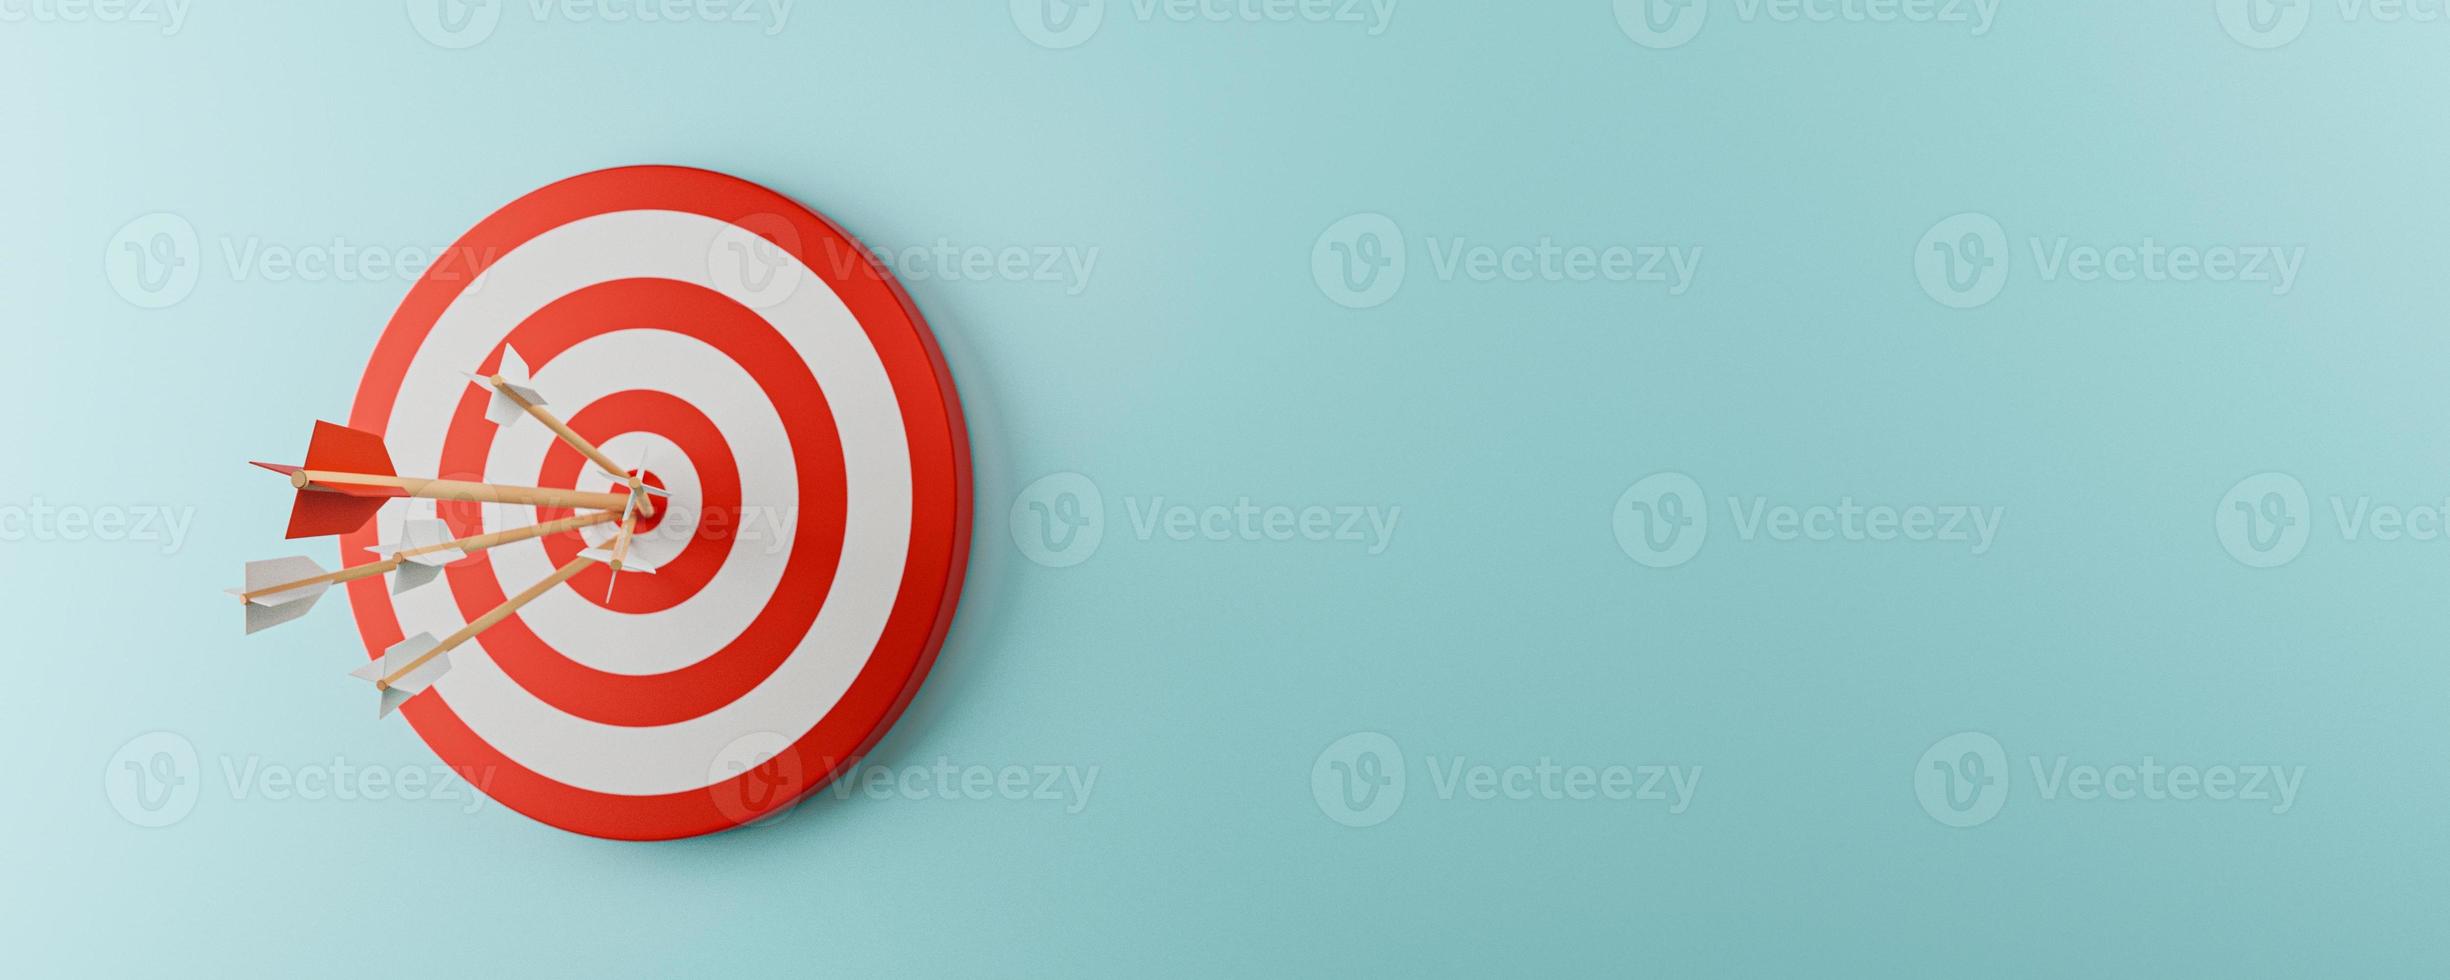 Target board with arrow on the blue background and copy space for challenge setup Business achievement goal and objective target concept by 3d render. photo